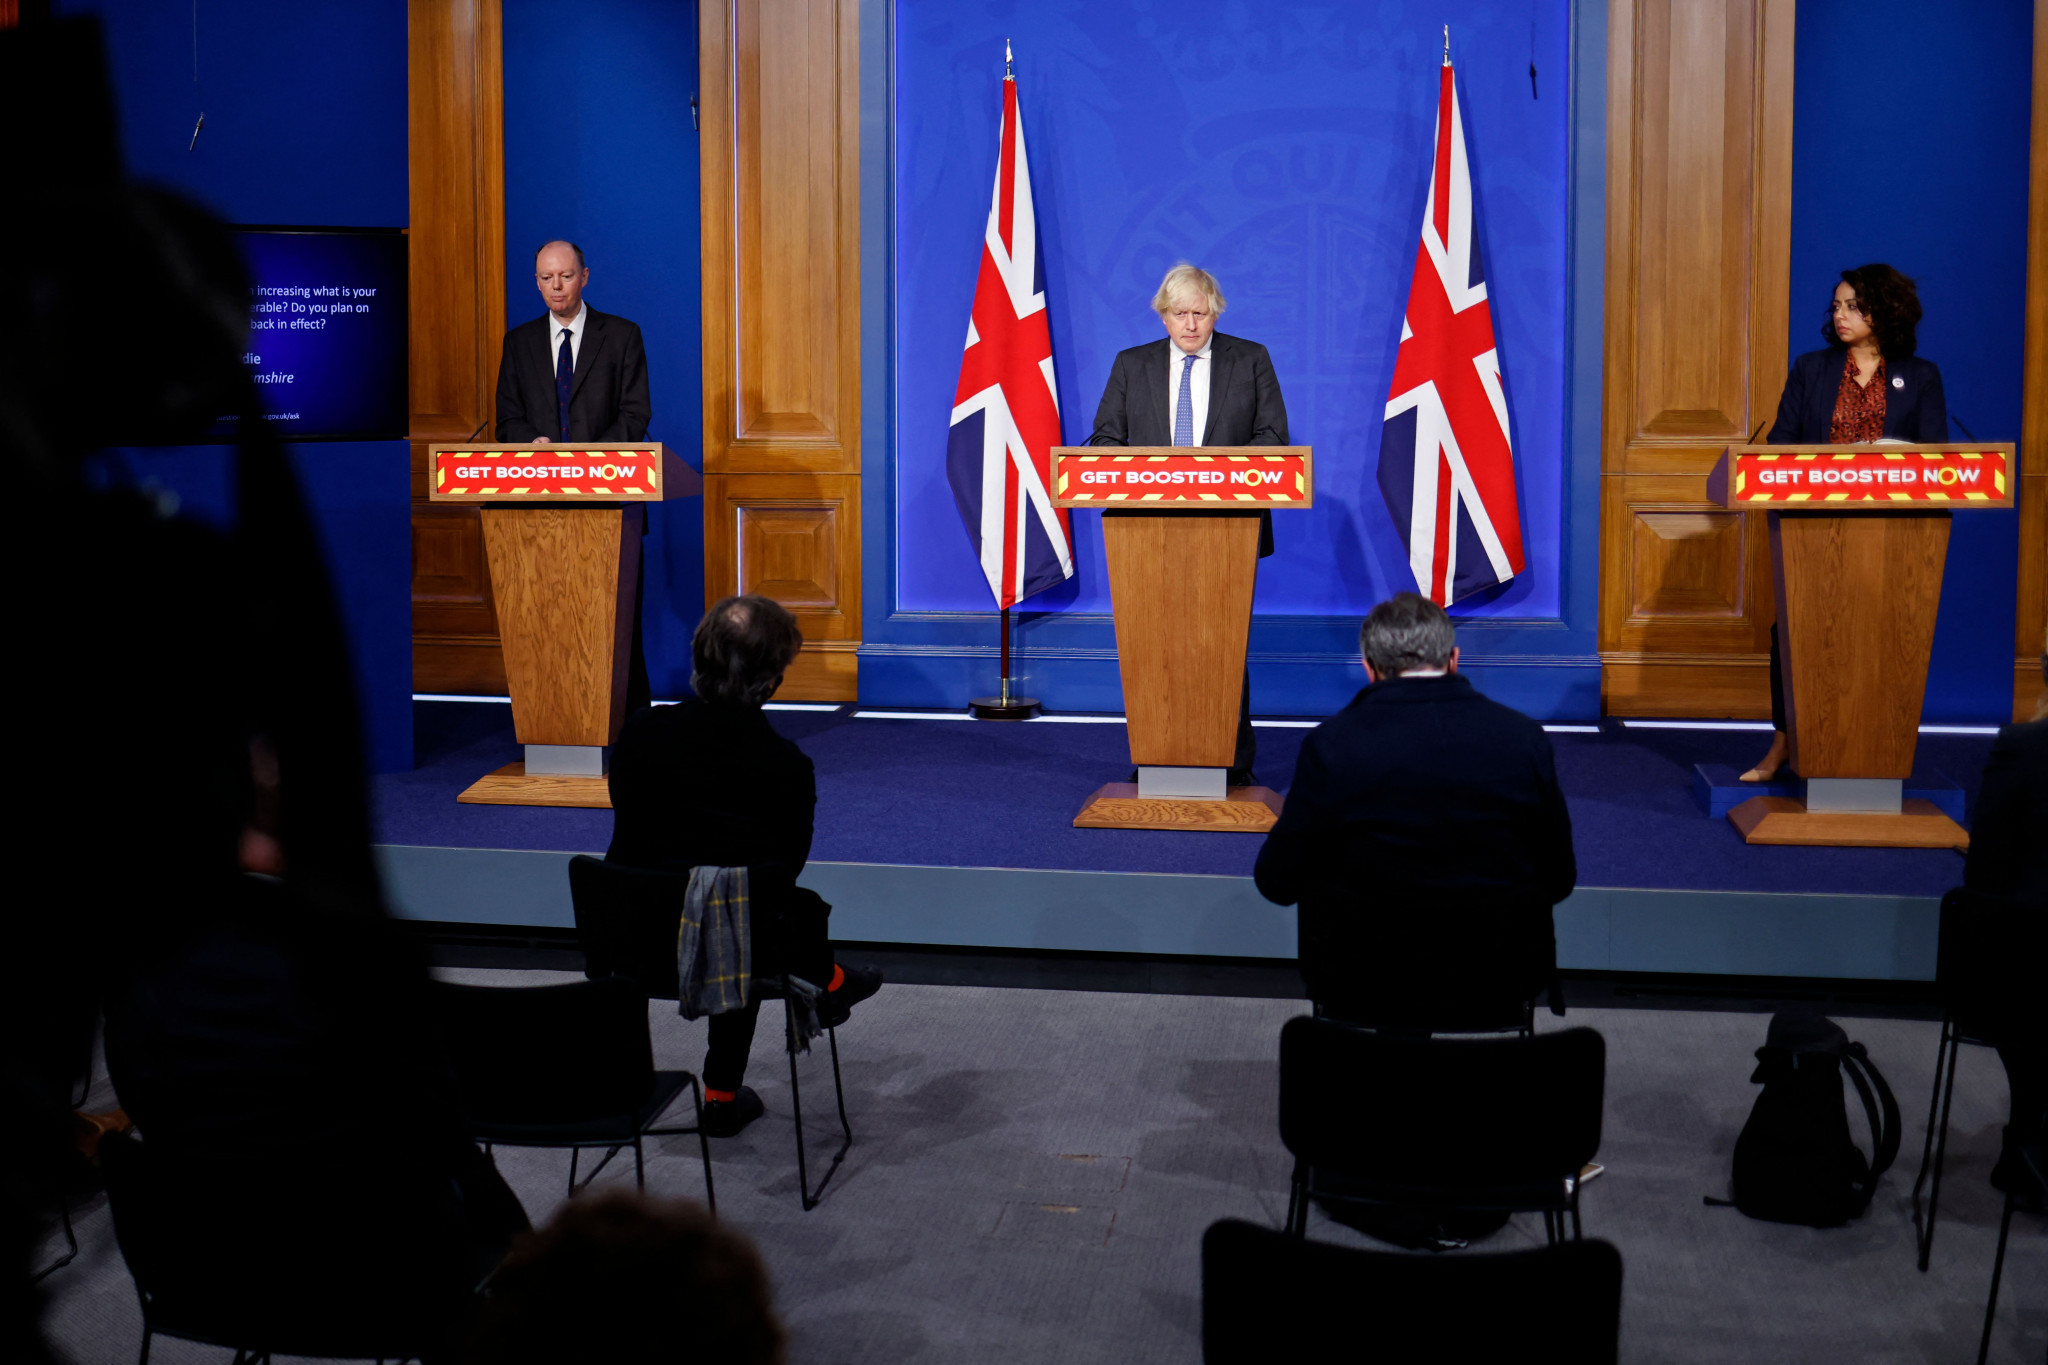 Britain has imposed some new COVID-19 restrictions, but Prime Minister Boris Johnson, centre, has faced stern criticism for his response and allegations Government officials broke rules last Christmas ©Getty Images